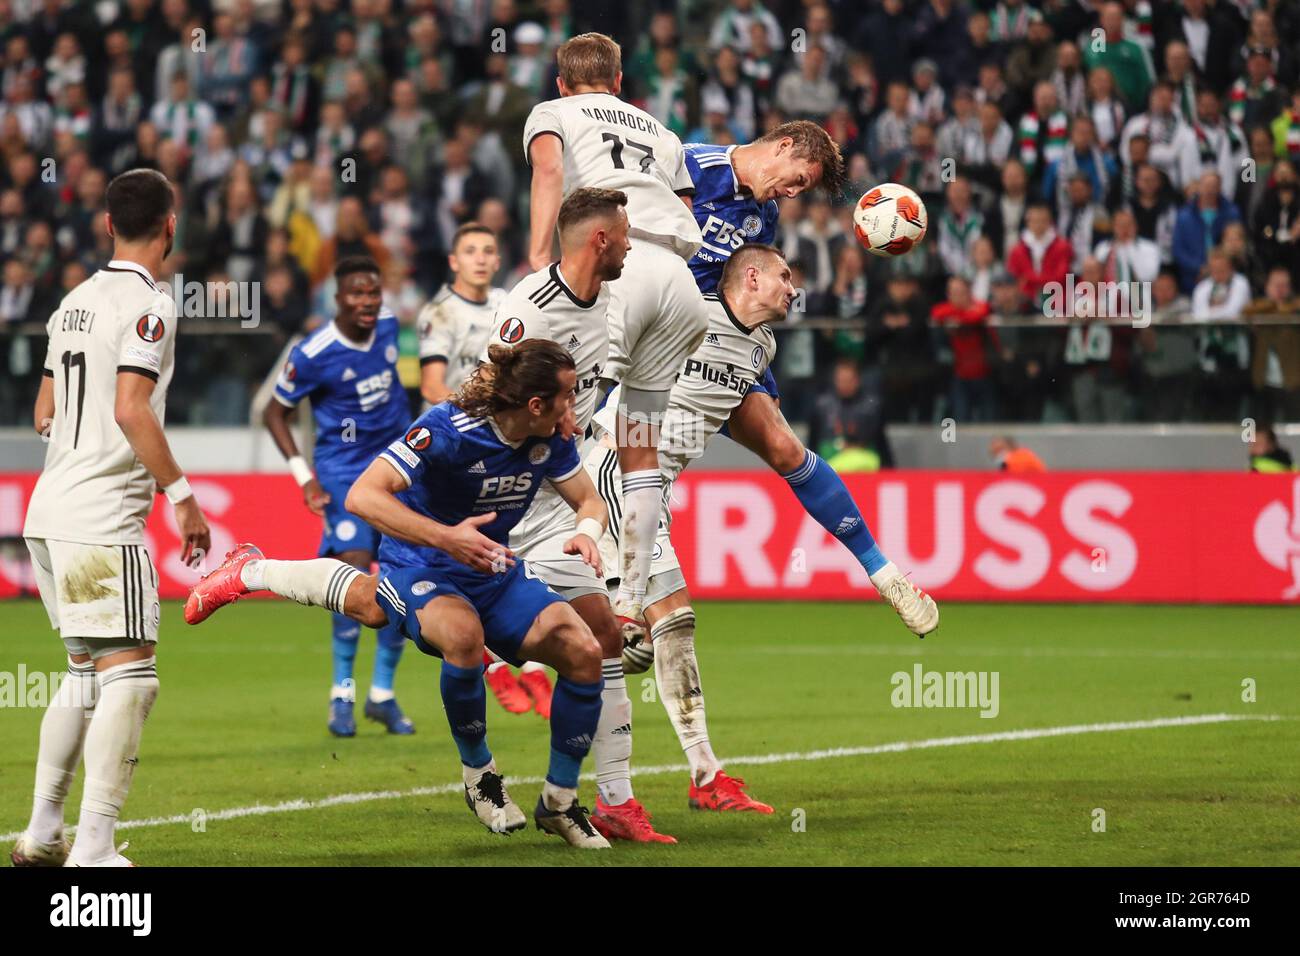 Warsaw, Poland. 30th Sep, 2021. Jannik Vastergaard (R, top) of Leicester wins a header with Artur Jedrzejczyk of Legia during the Europa League Group C football match between Legia Warsaw and Leicester City in Warsaw, Poland, Sept. 30, 2021. Credit: Adam Starszynski/Xinhua/Alamy Live News Stock Photo